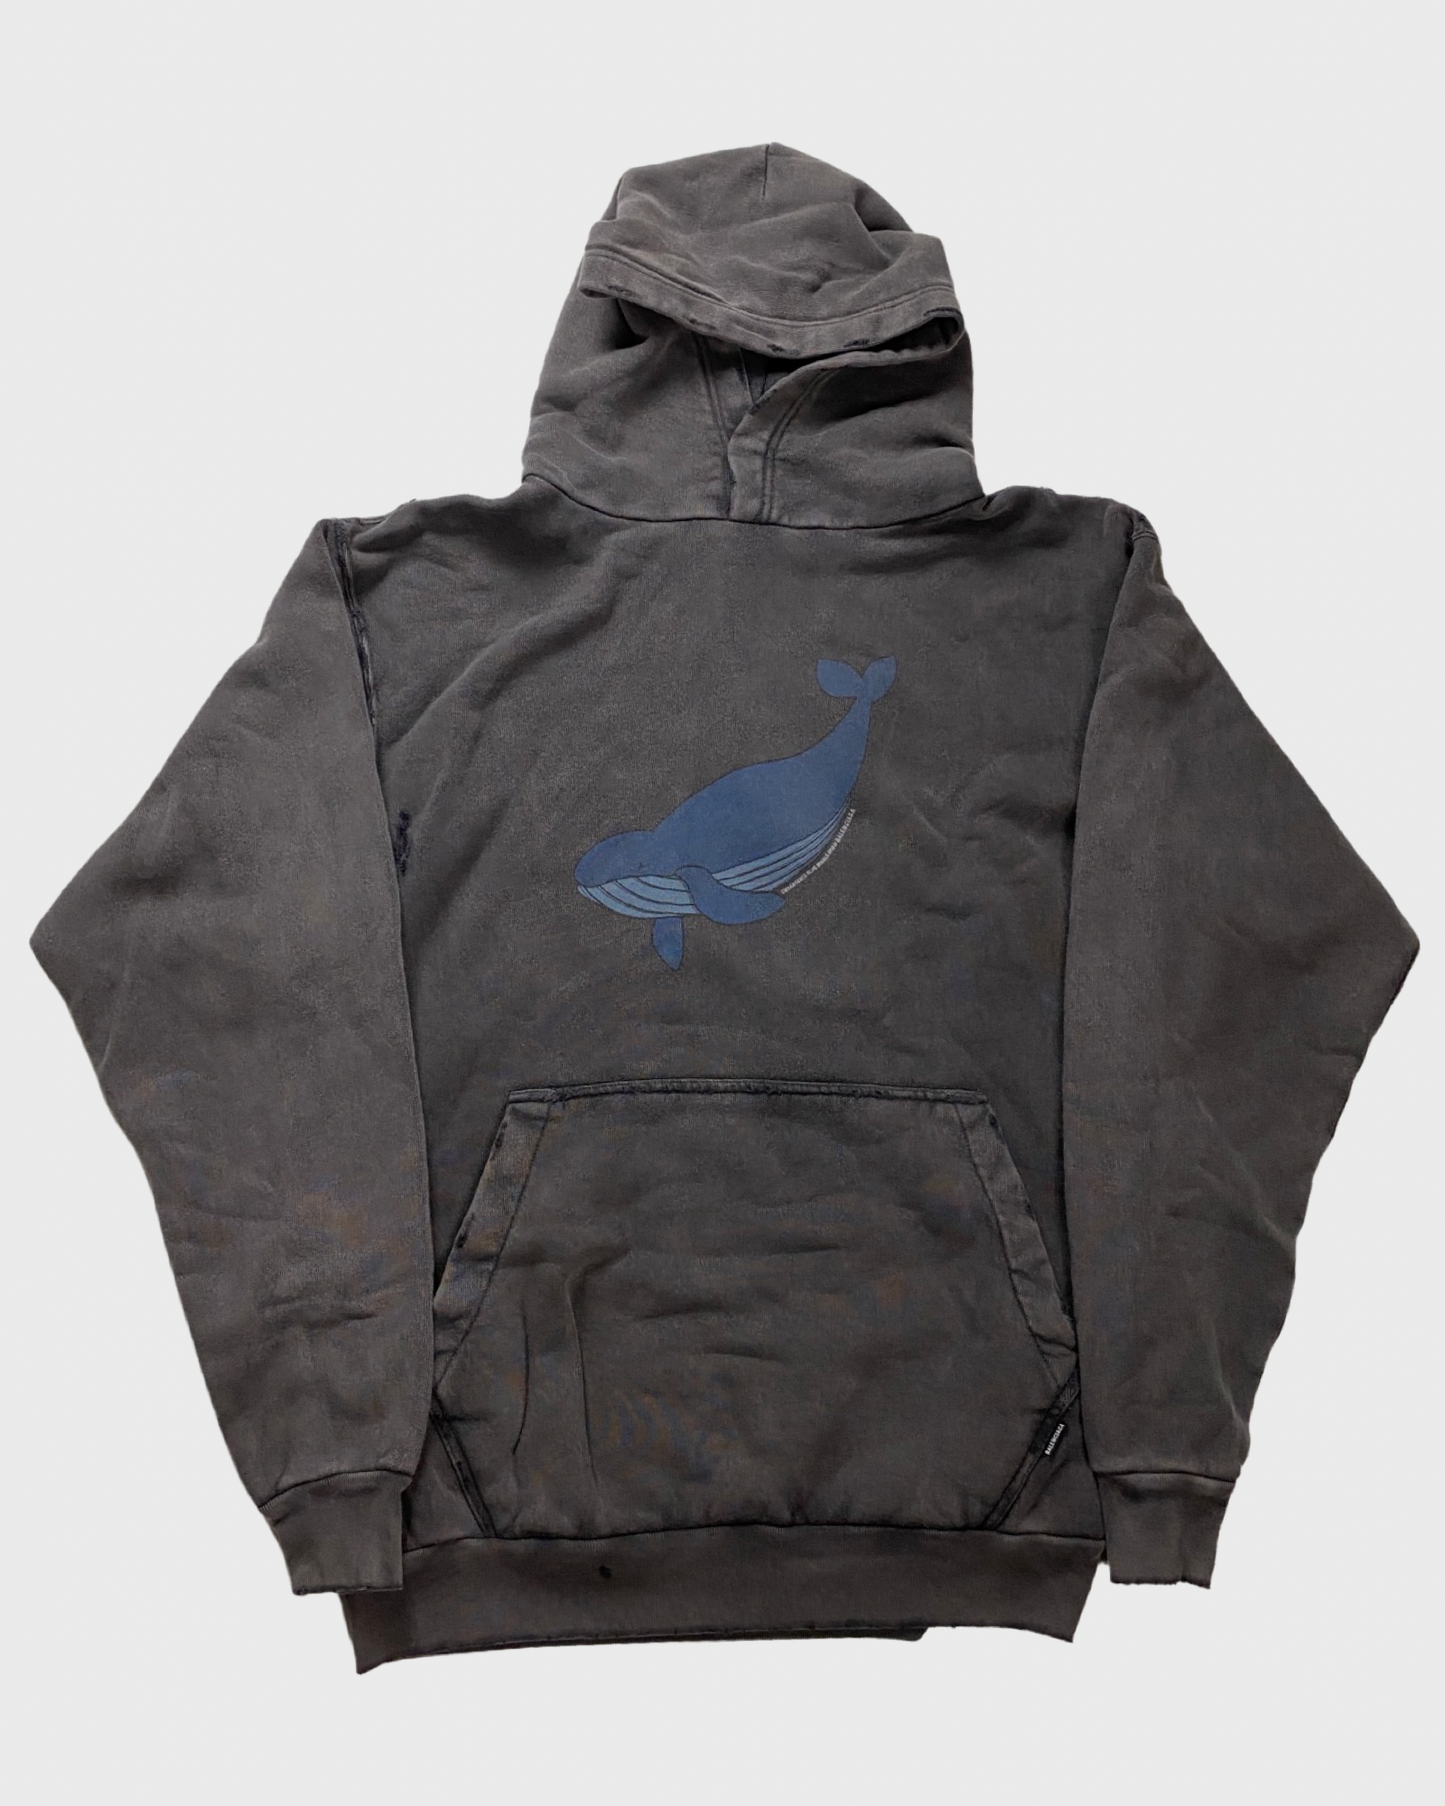 Balenciaga endangered species capsule collection grey whale hoodie SZ:XS